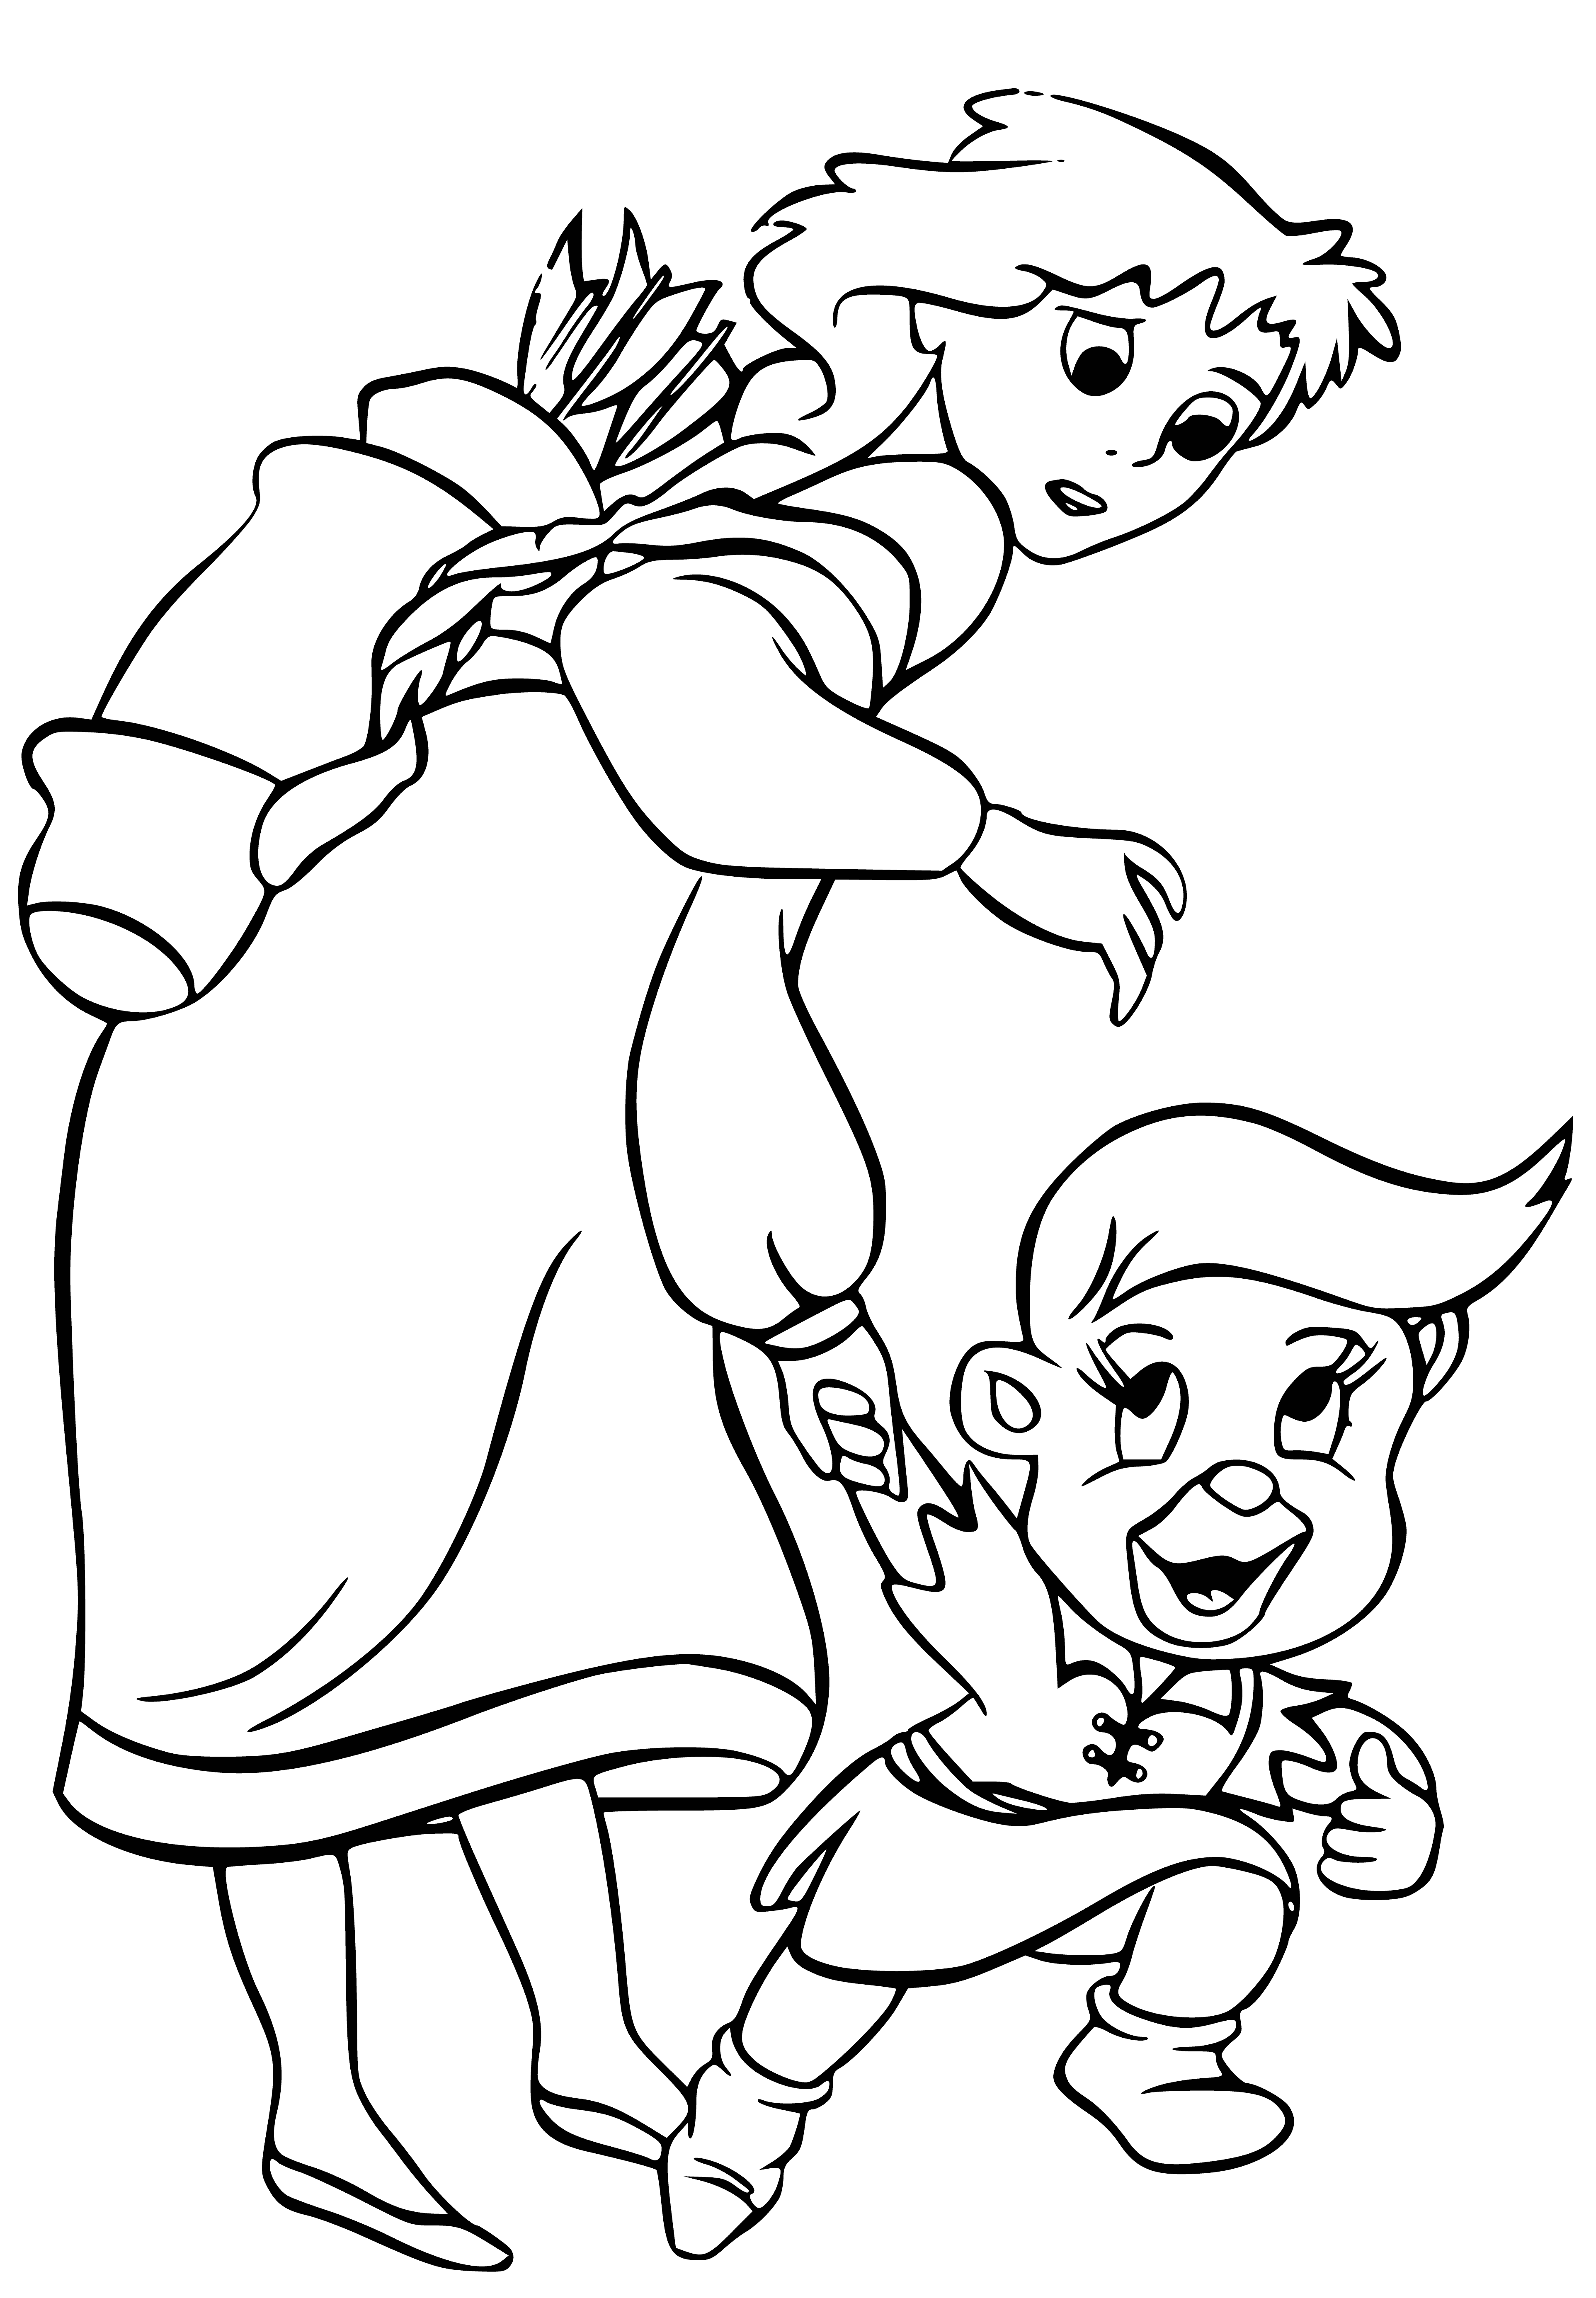 coloring page: Archer from Gummi Bears is a tall, thin bear with brown fur, a long face, big nose, and big ears. He wears a blue shirt with white collar and brown pants and holds a bow and arrow.